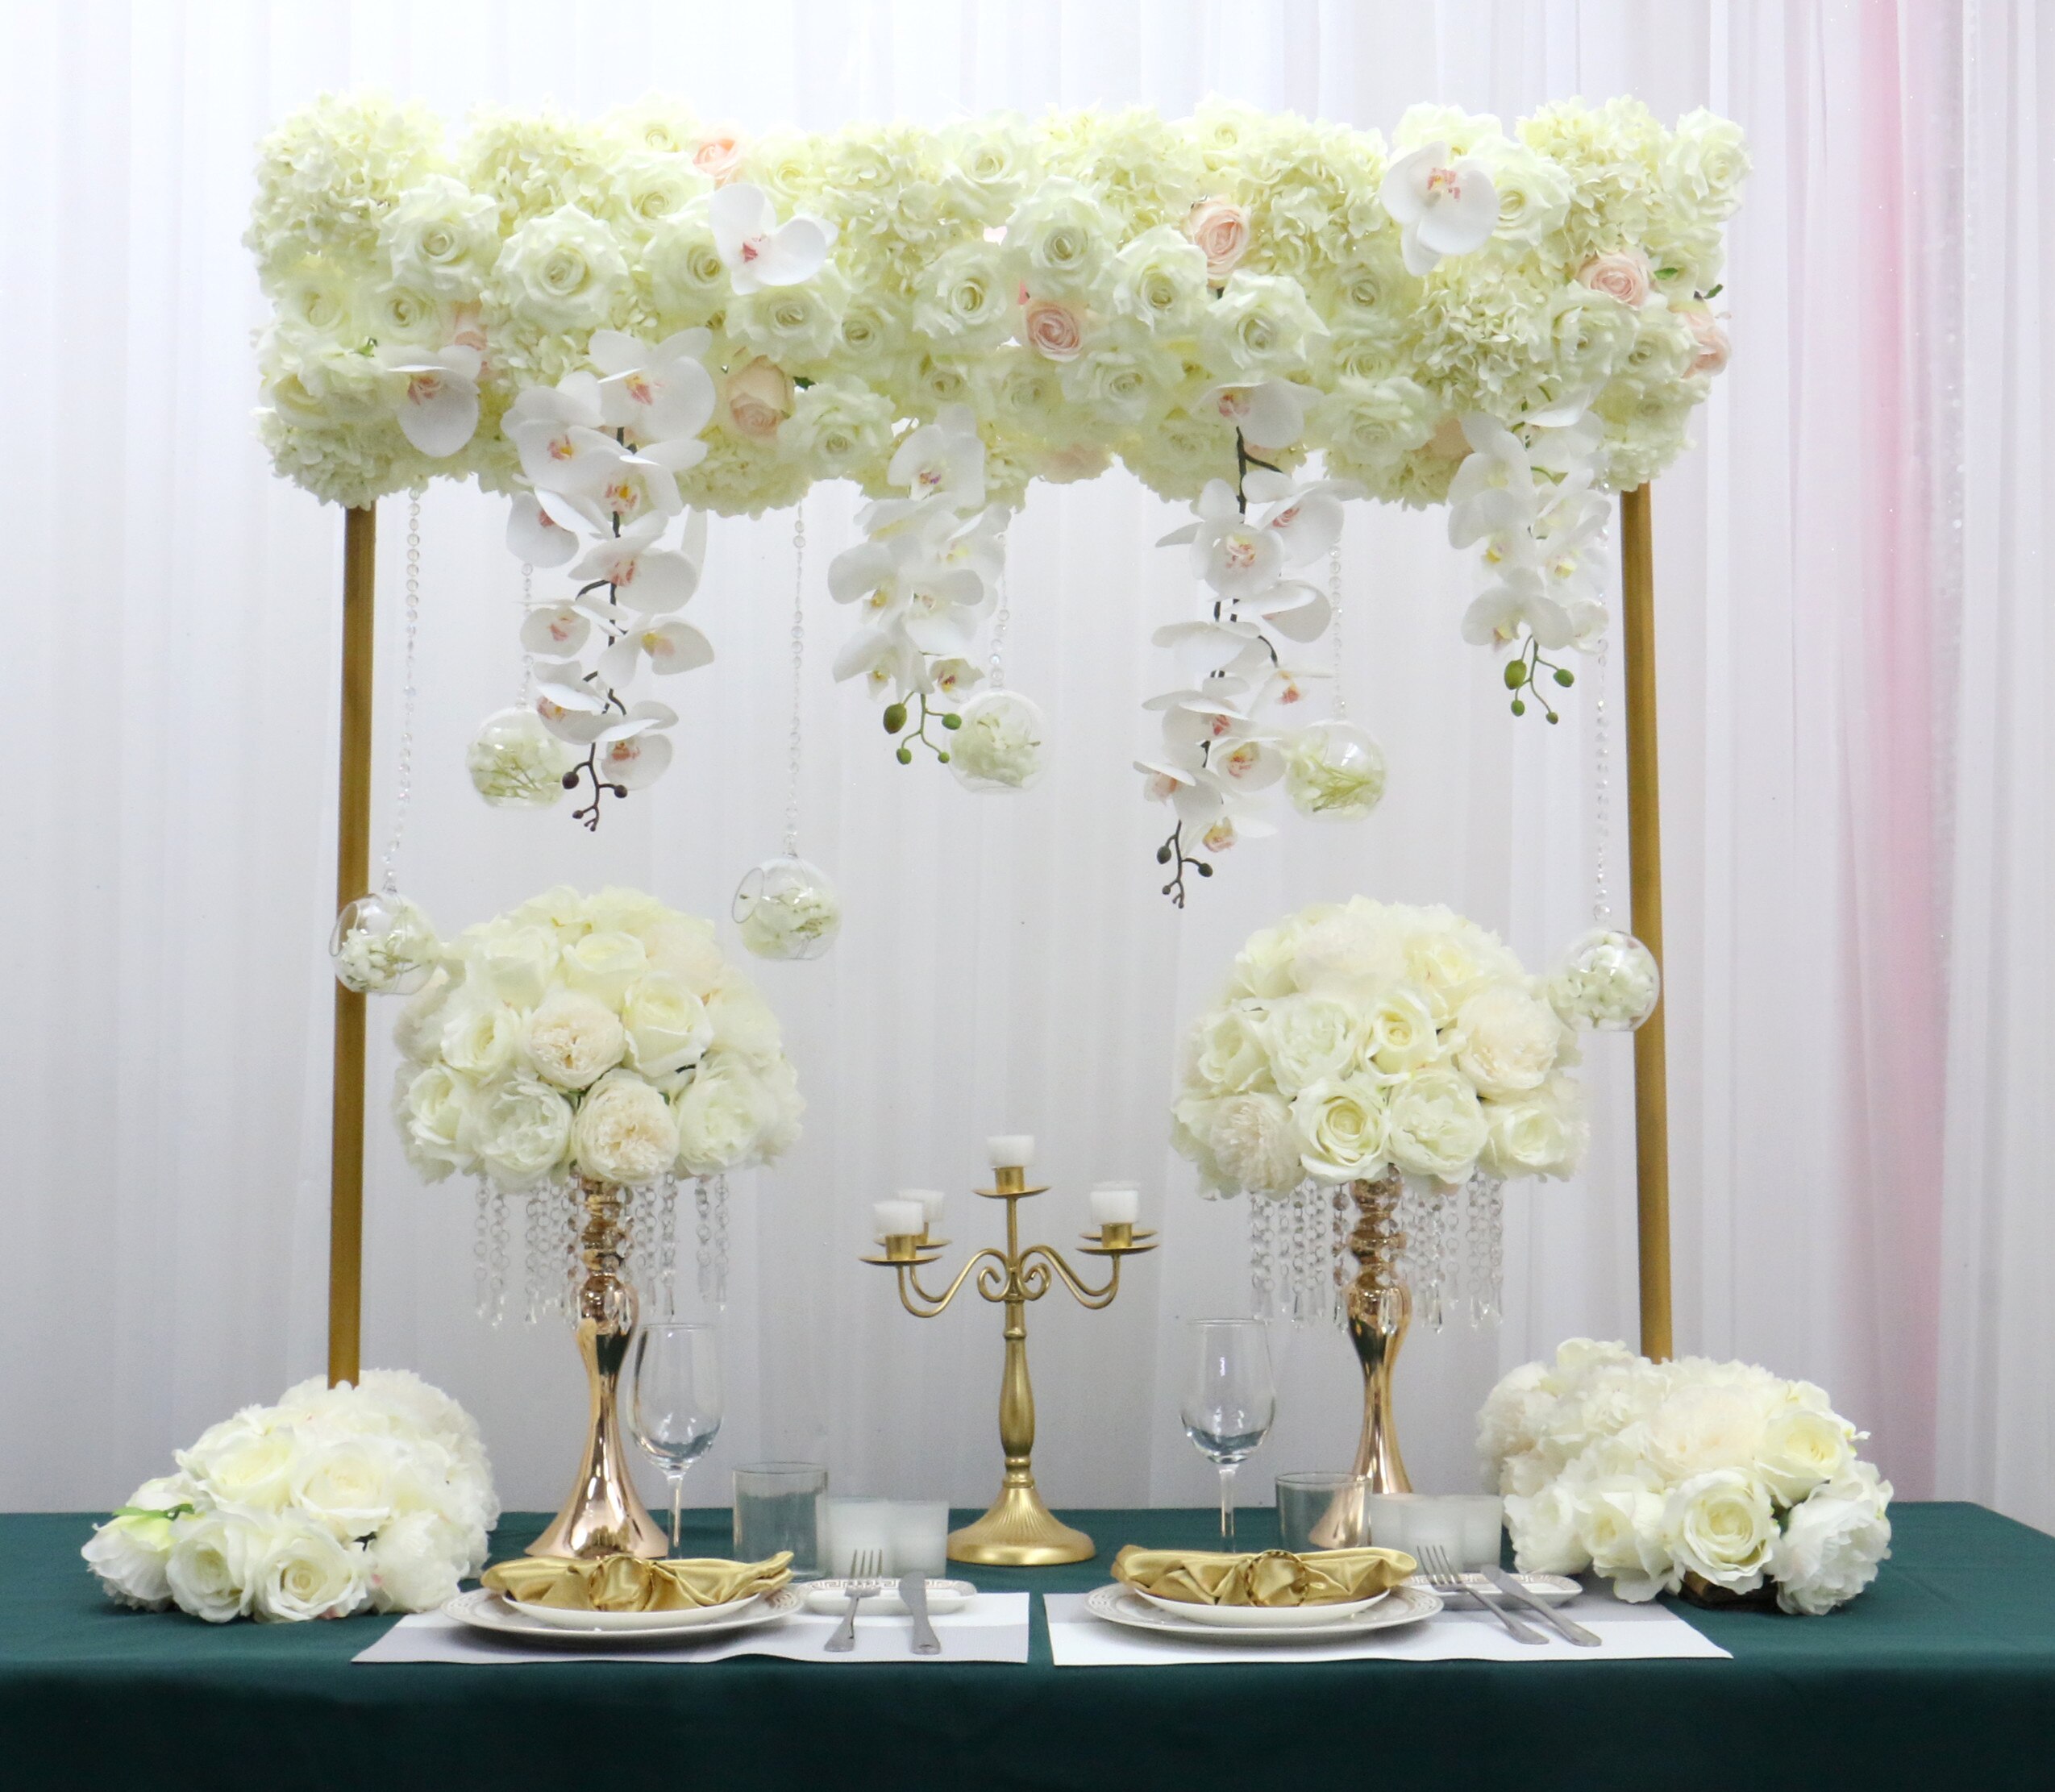 how to make tea party tall flower arrangements?